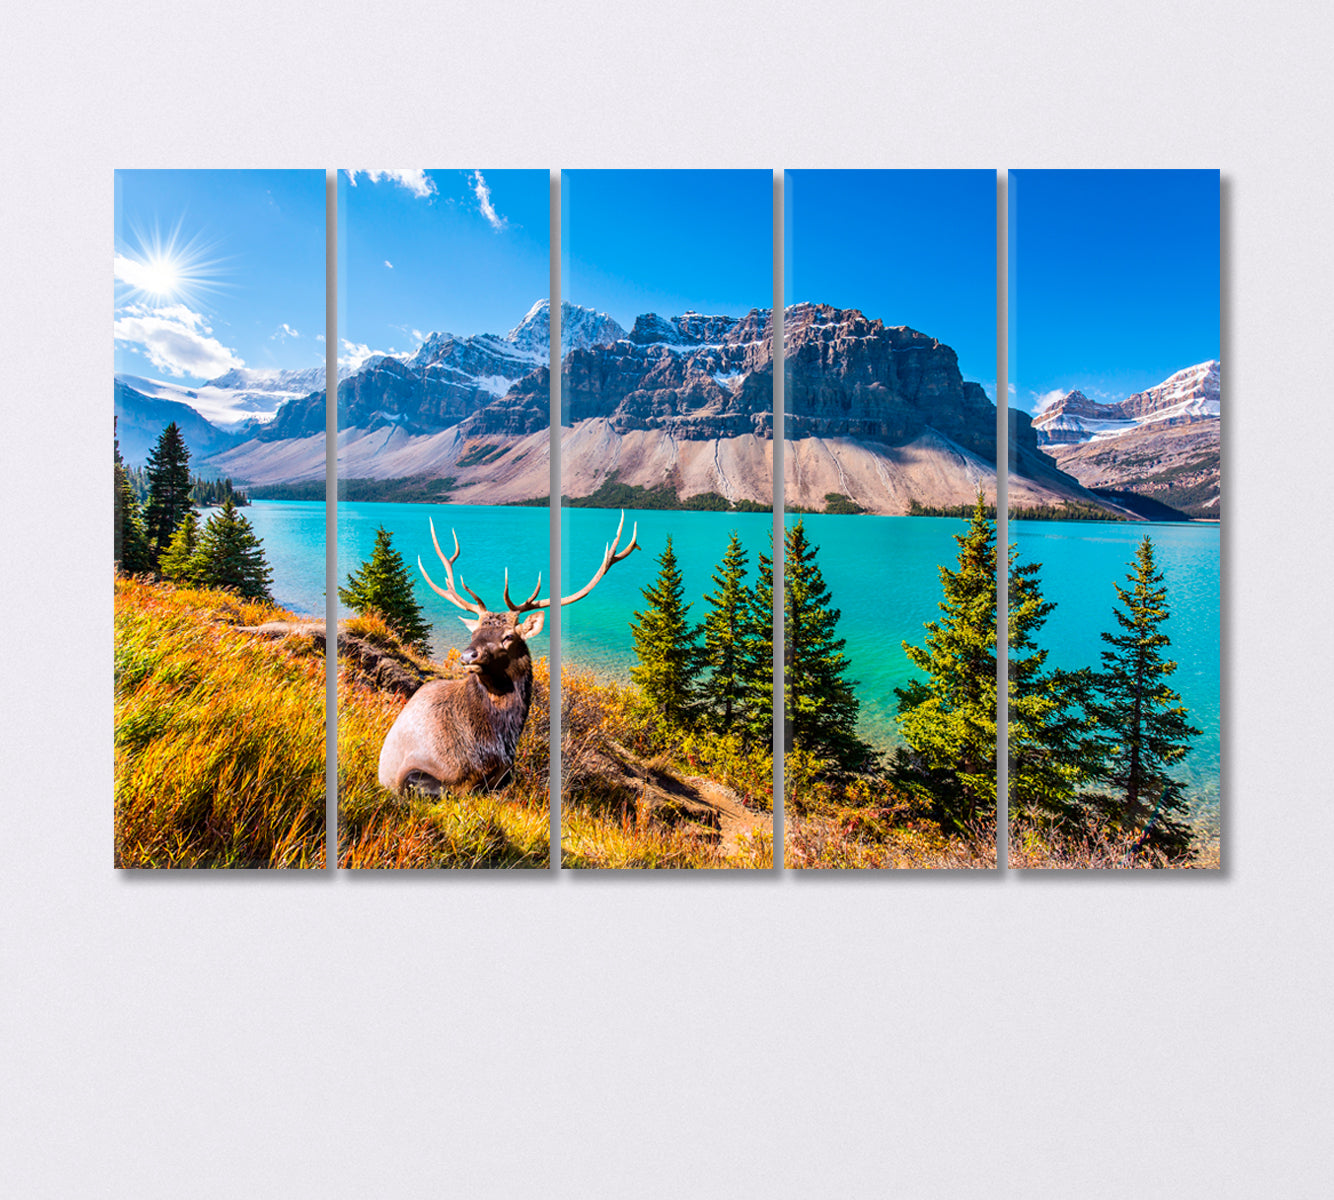 Deer with Forked Antlers near Glacial Lake Bow Canada Canvas Print-Canvas Print-CetArt-5 Panels-36x24 inches-CetArt